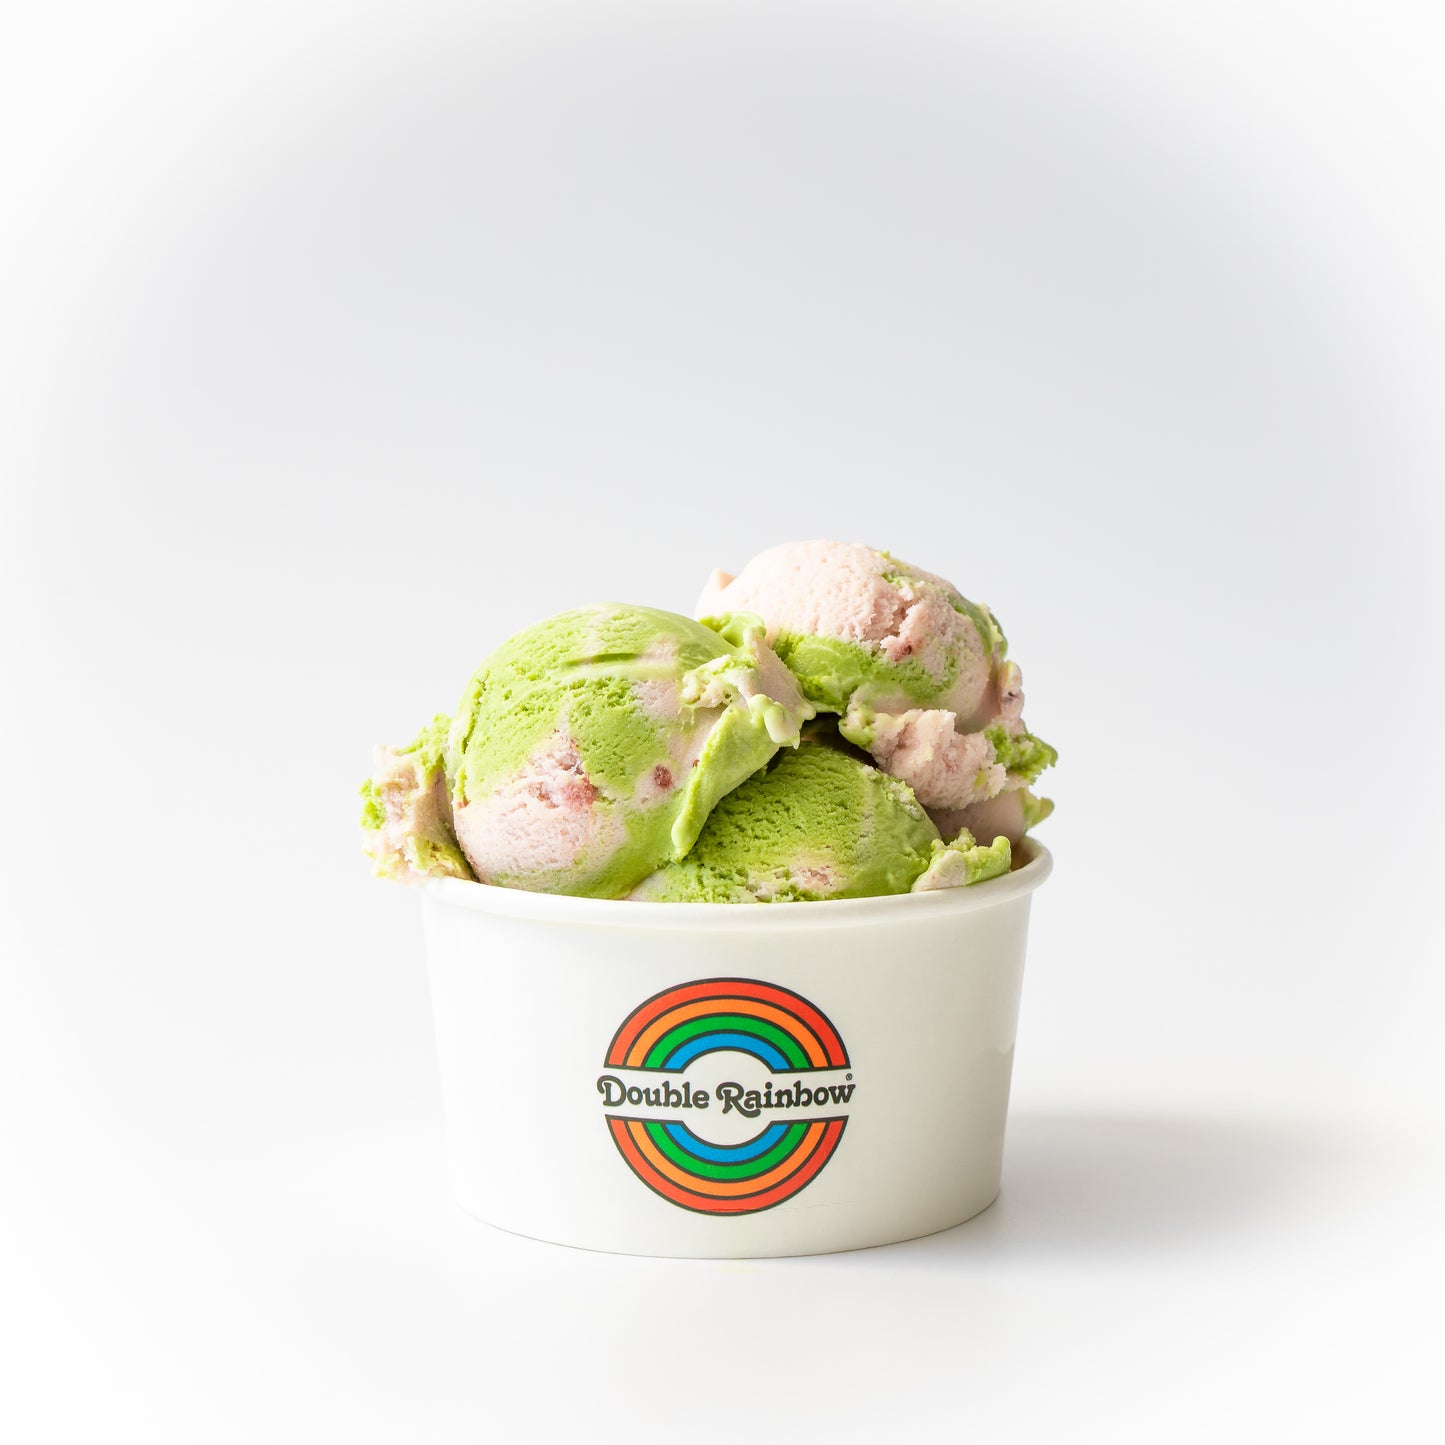 Scoops of Strawberry Matcha ice Cream in a Double Rainbow Cup